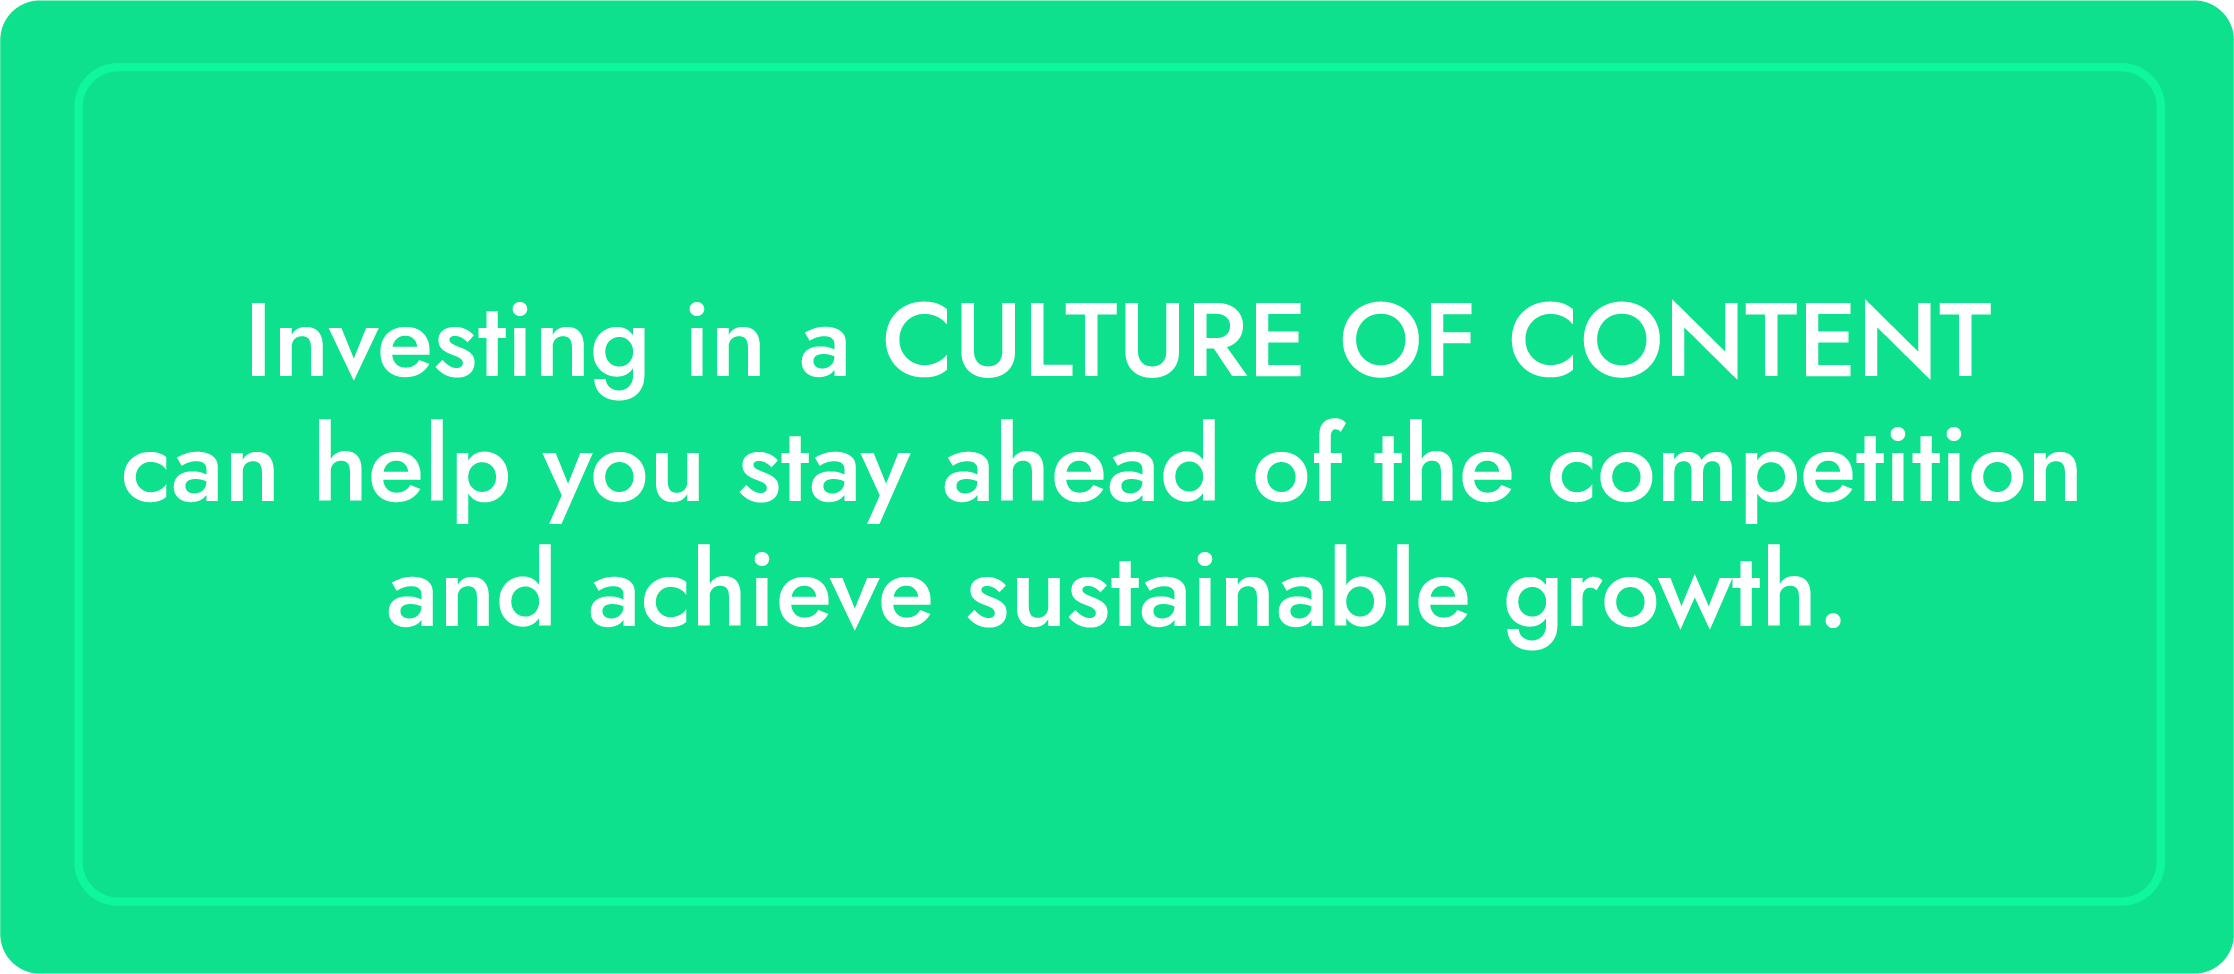 Investing in culture of content can help you stay ahead of the competition and achieve sustainable growth.